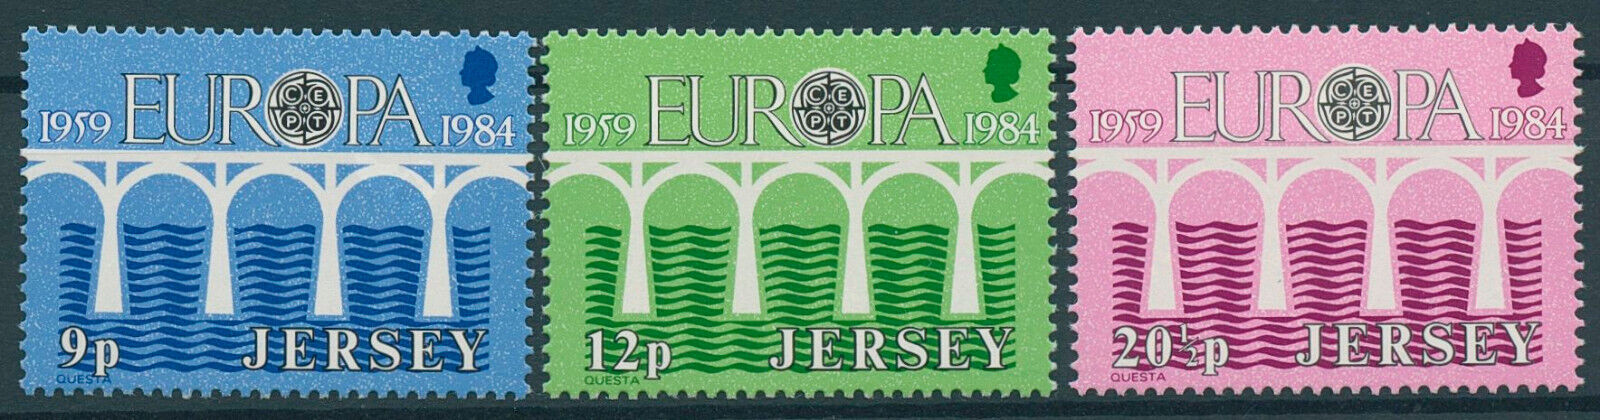 Jersey 1984 MNH Europa Stamps CEPT 25th Anniversary 3v Set